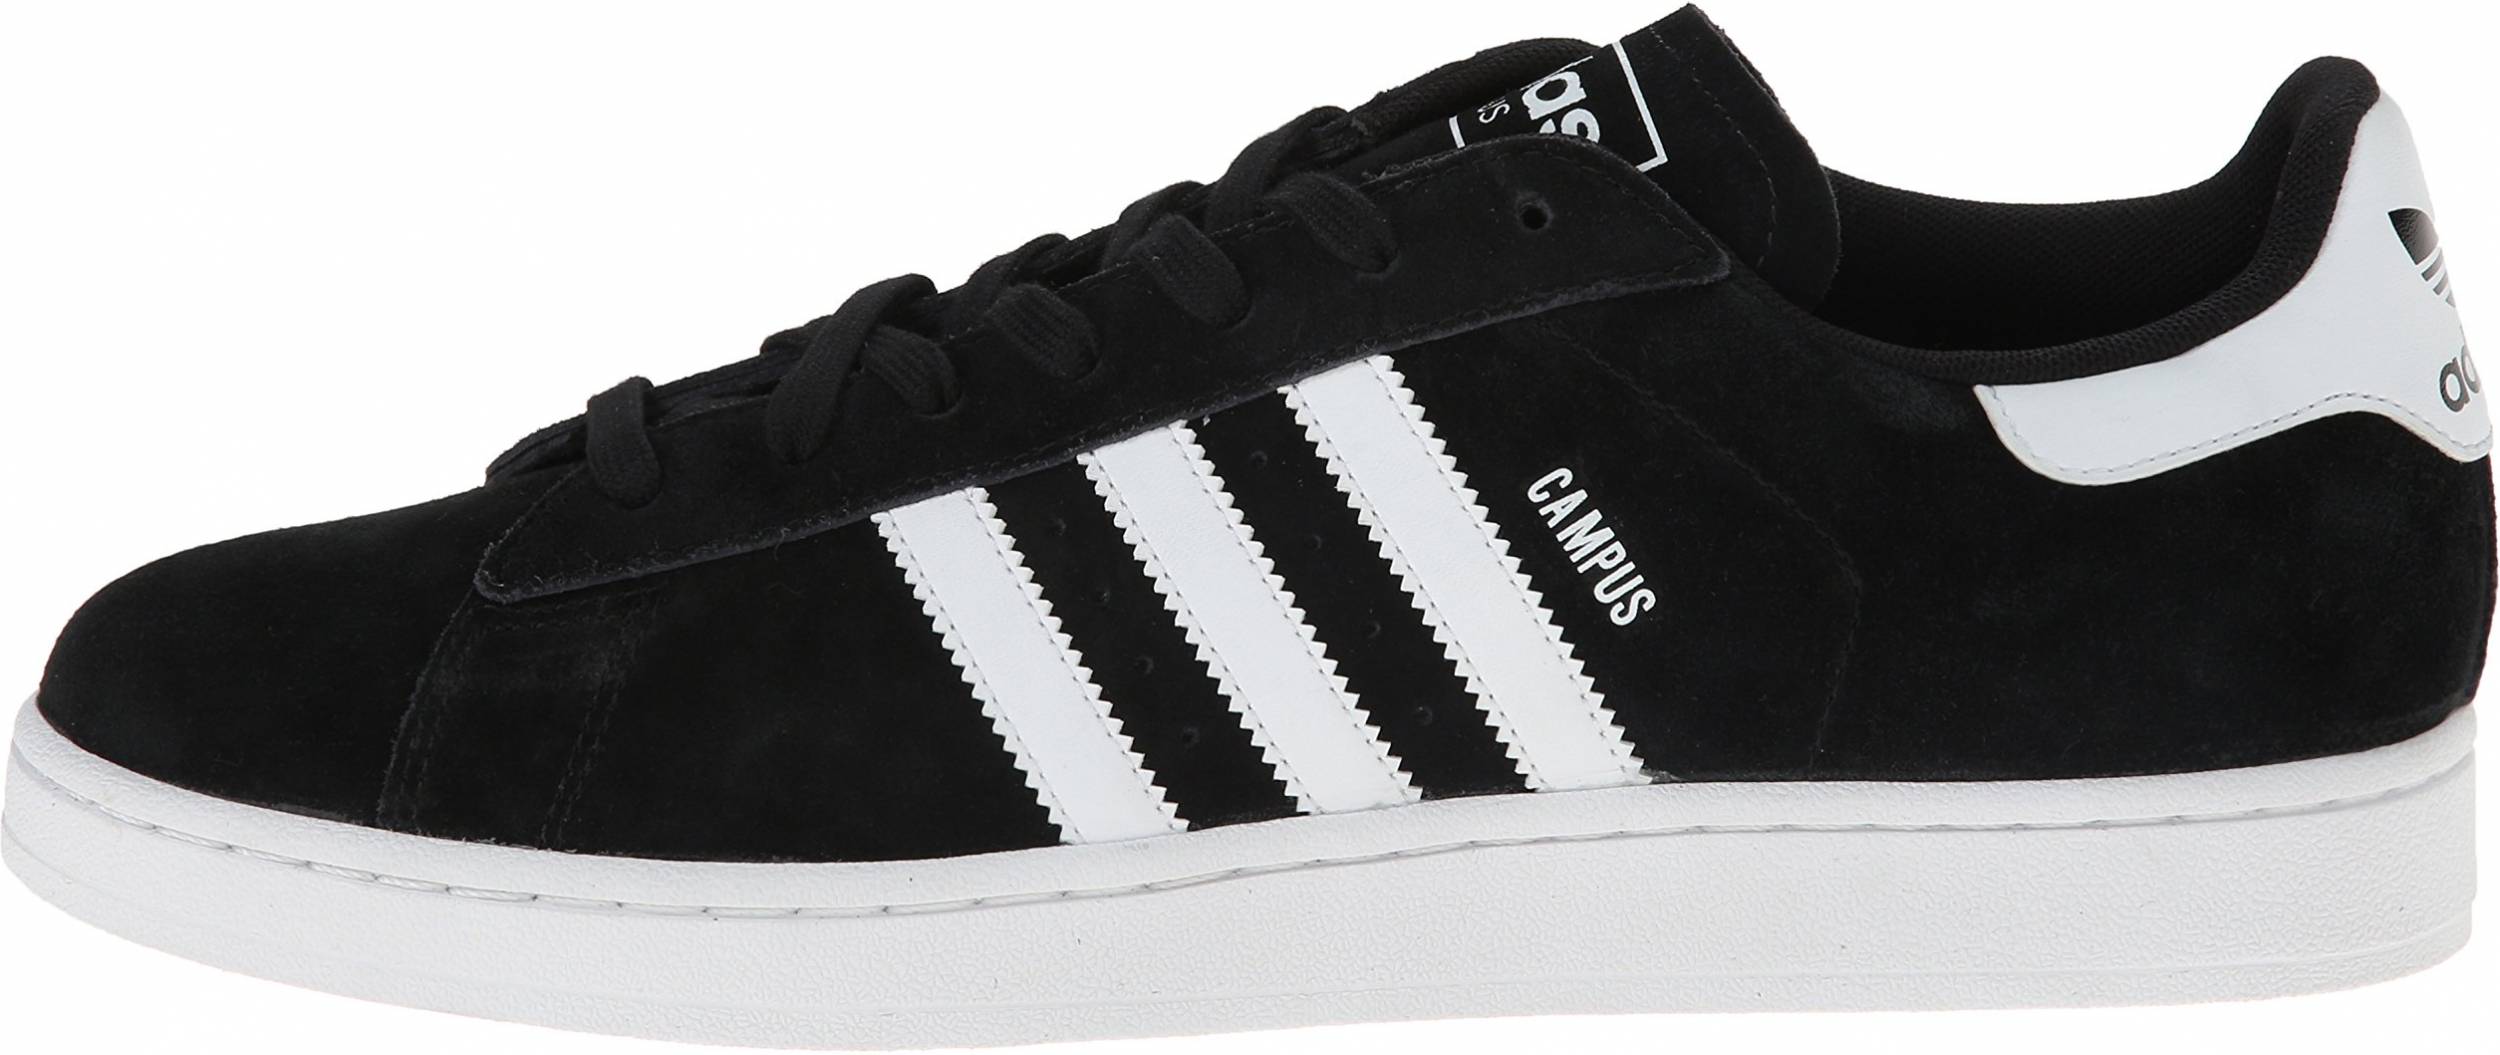 Only $60 + Review of Adidas Campus 2 